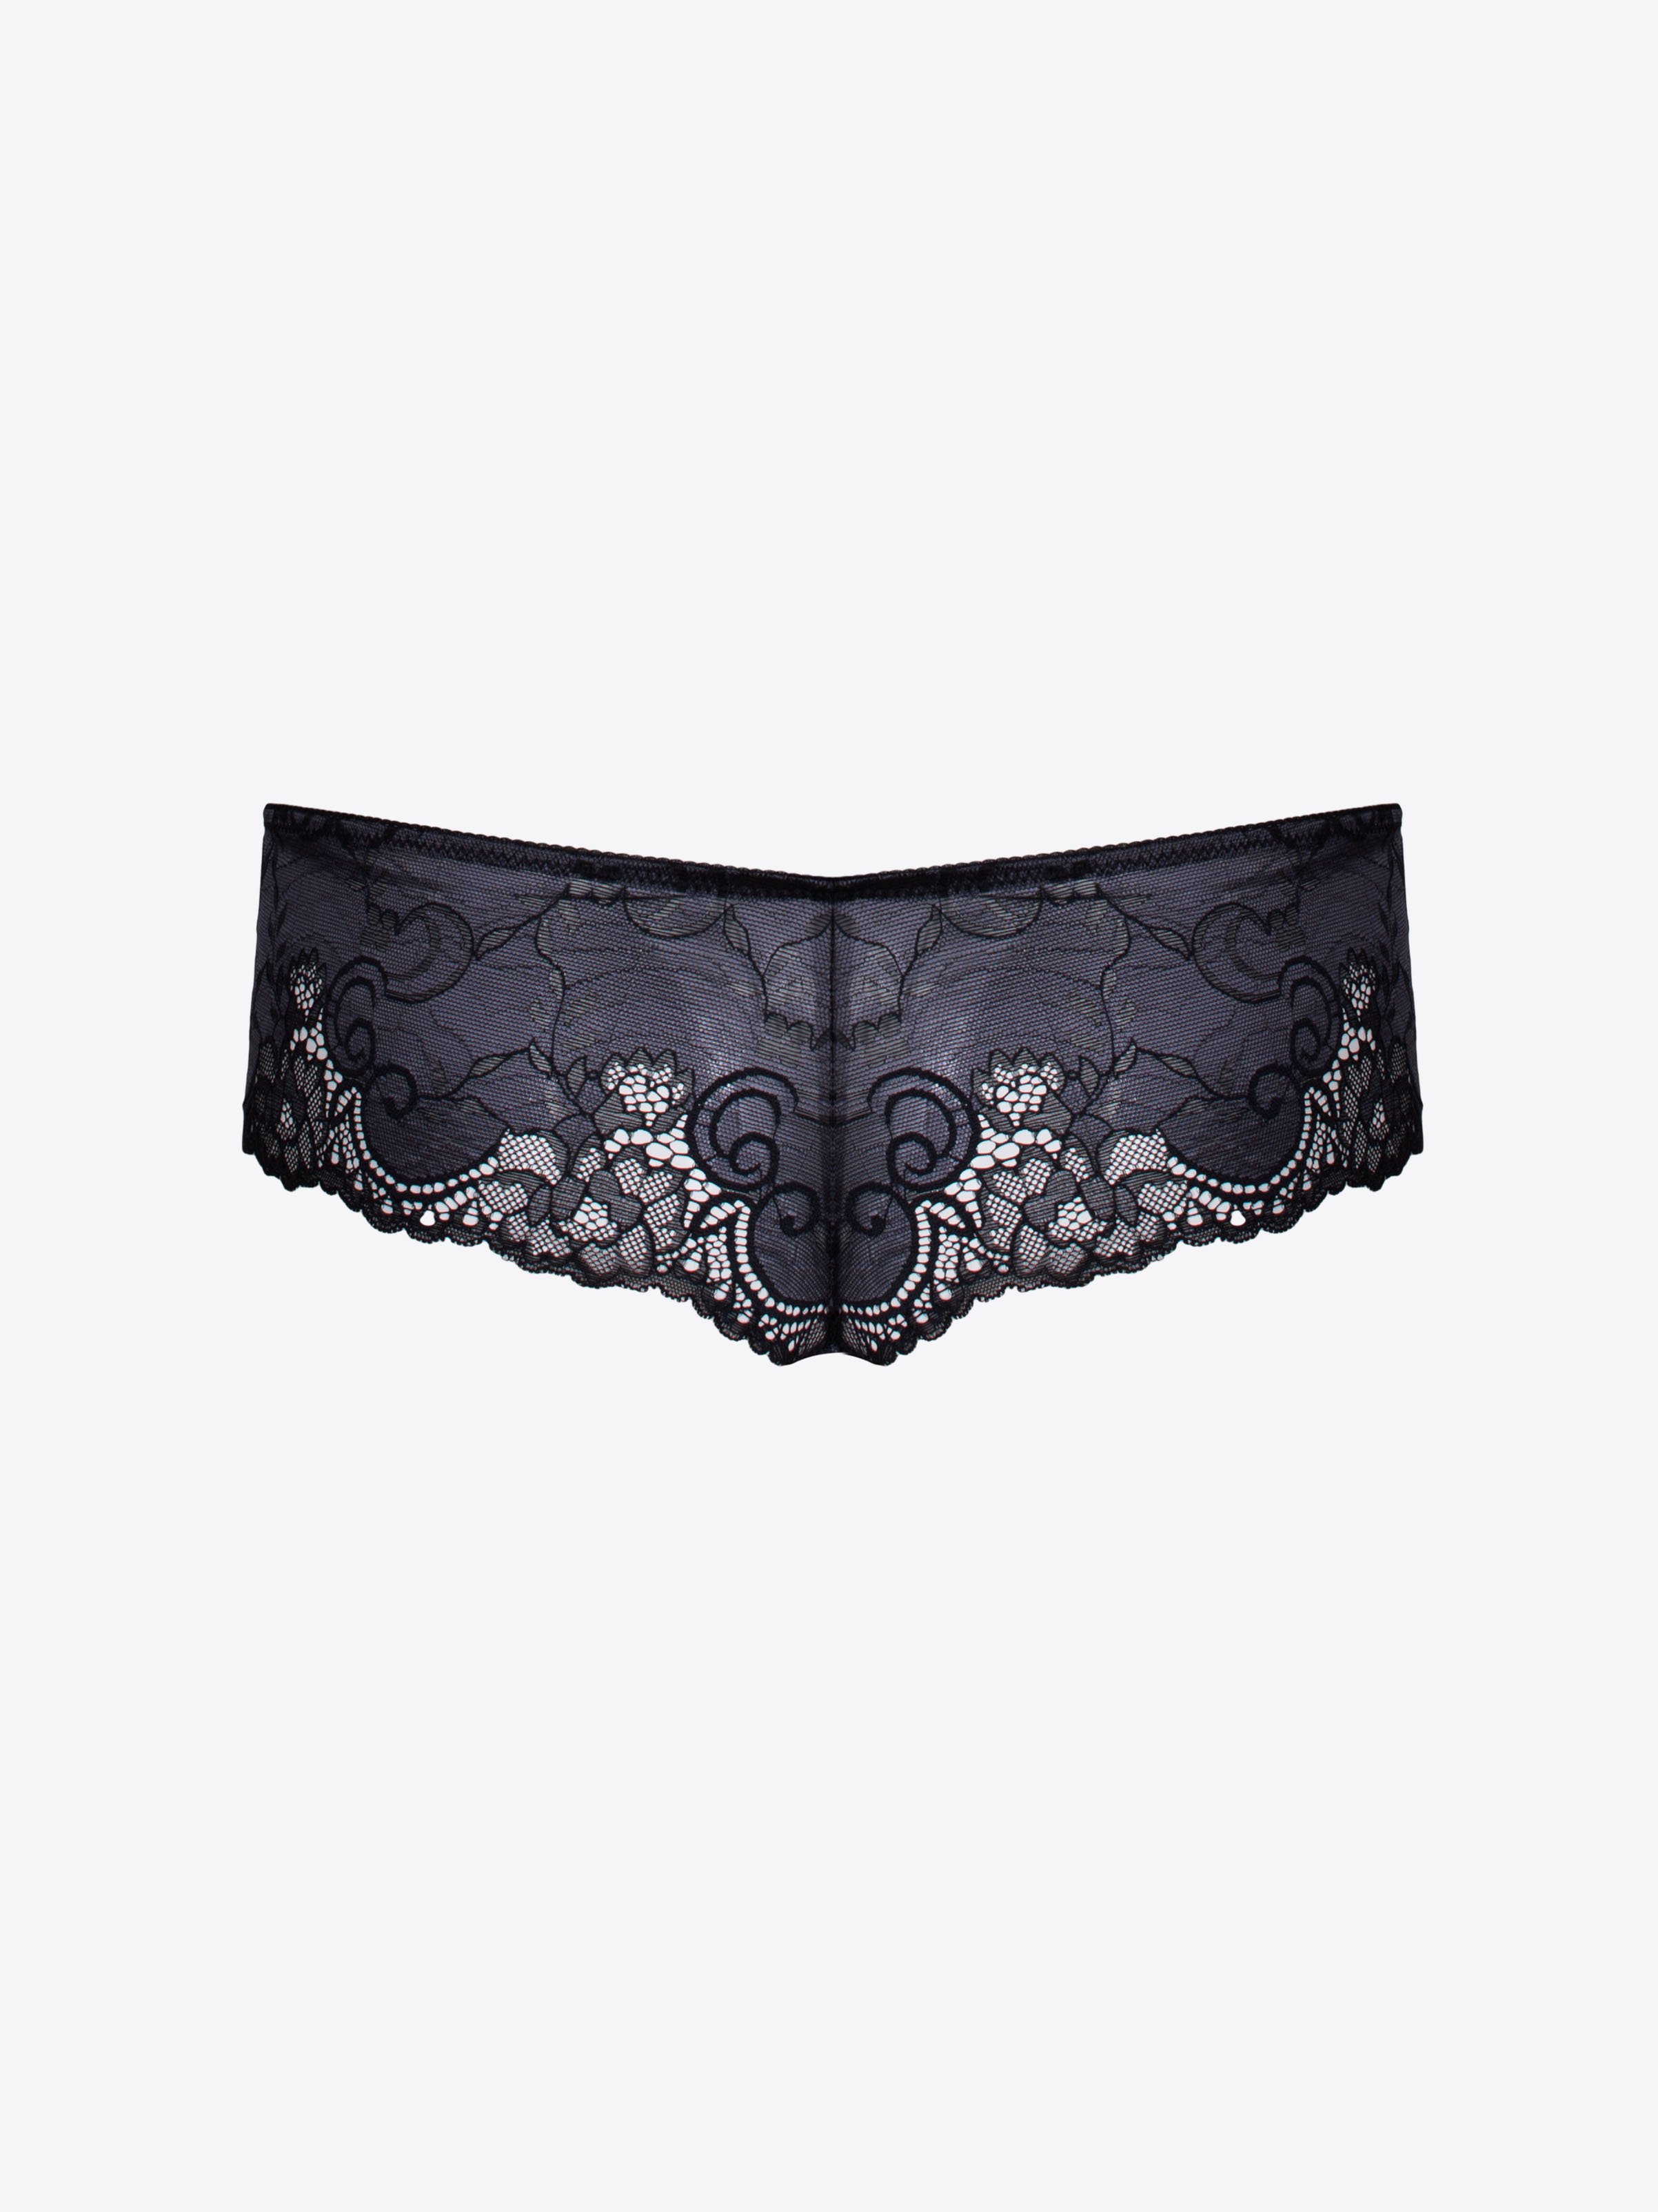 Andriana Hipster Thong - Pavement With Black - CA$7.80 - CHANGE Lingerie